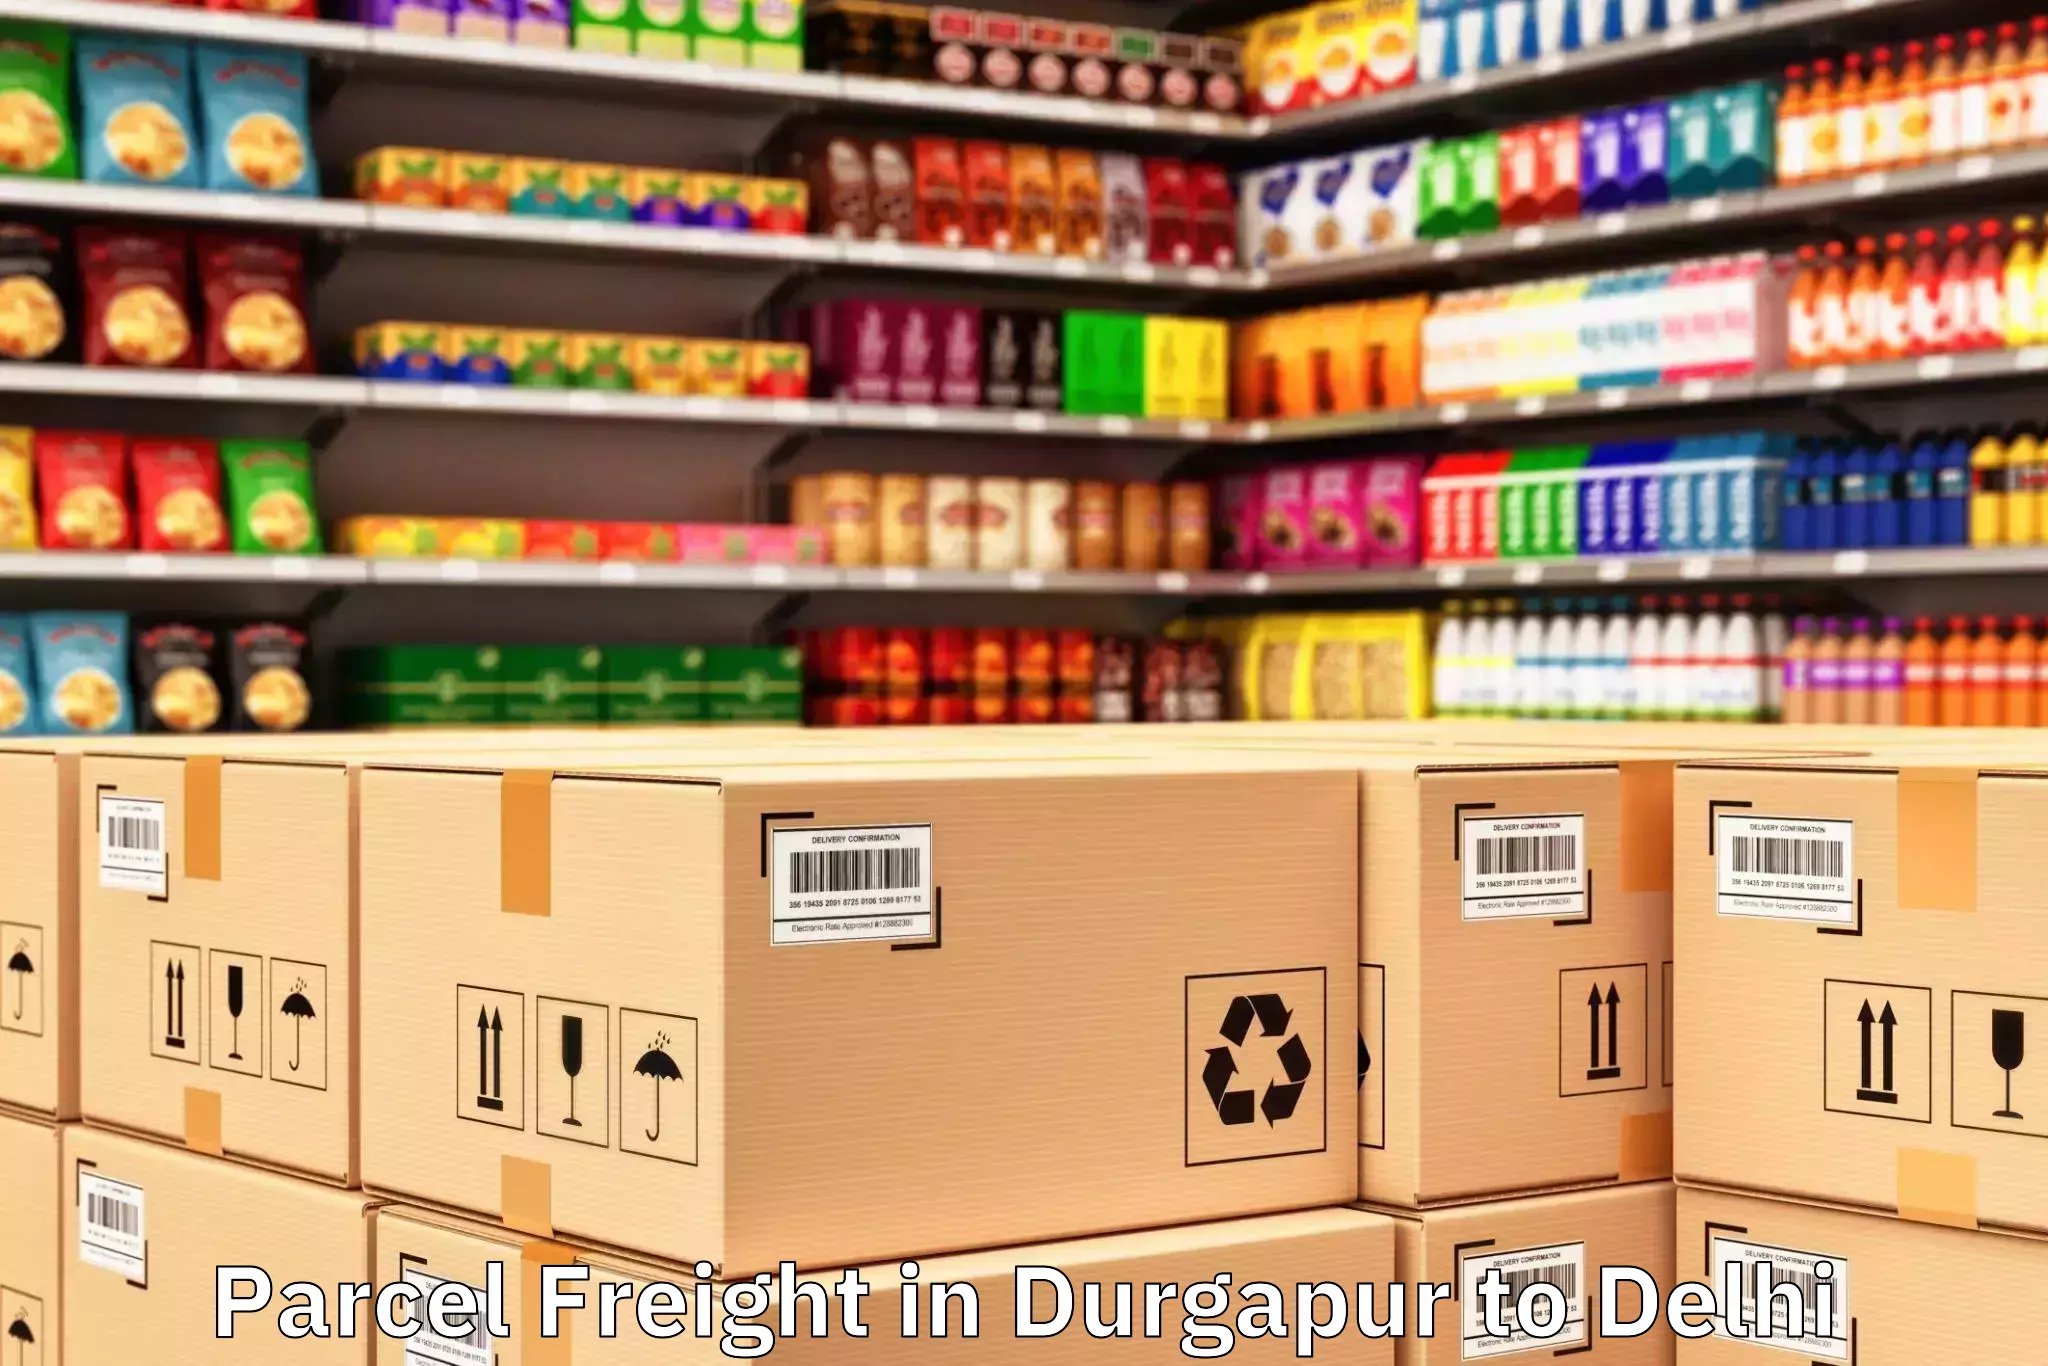 Durgapur to Delhi Pharmaceutical Sciences And Research University New Delhi Parcel Freight Booking